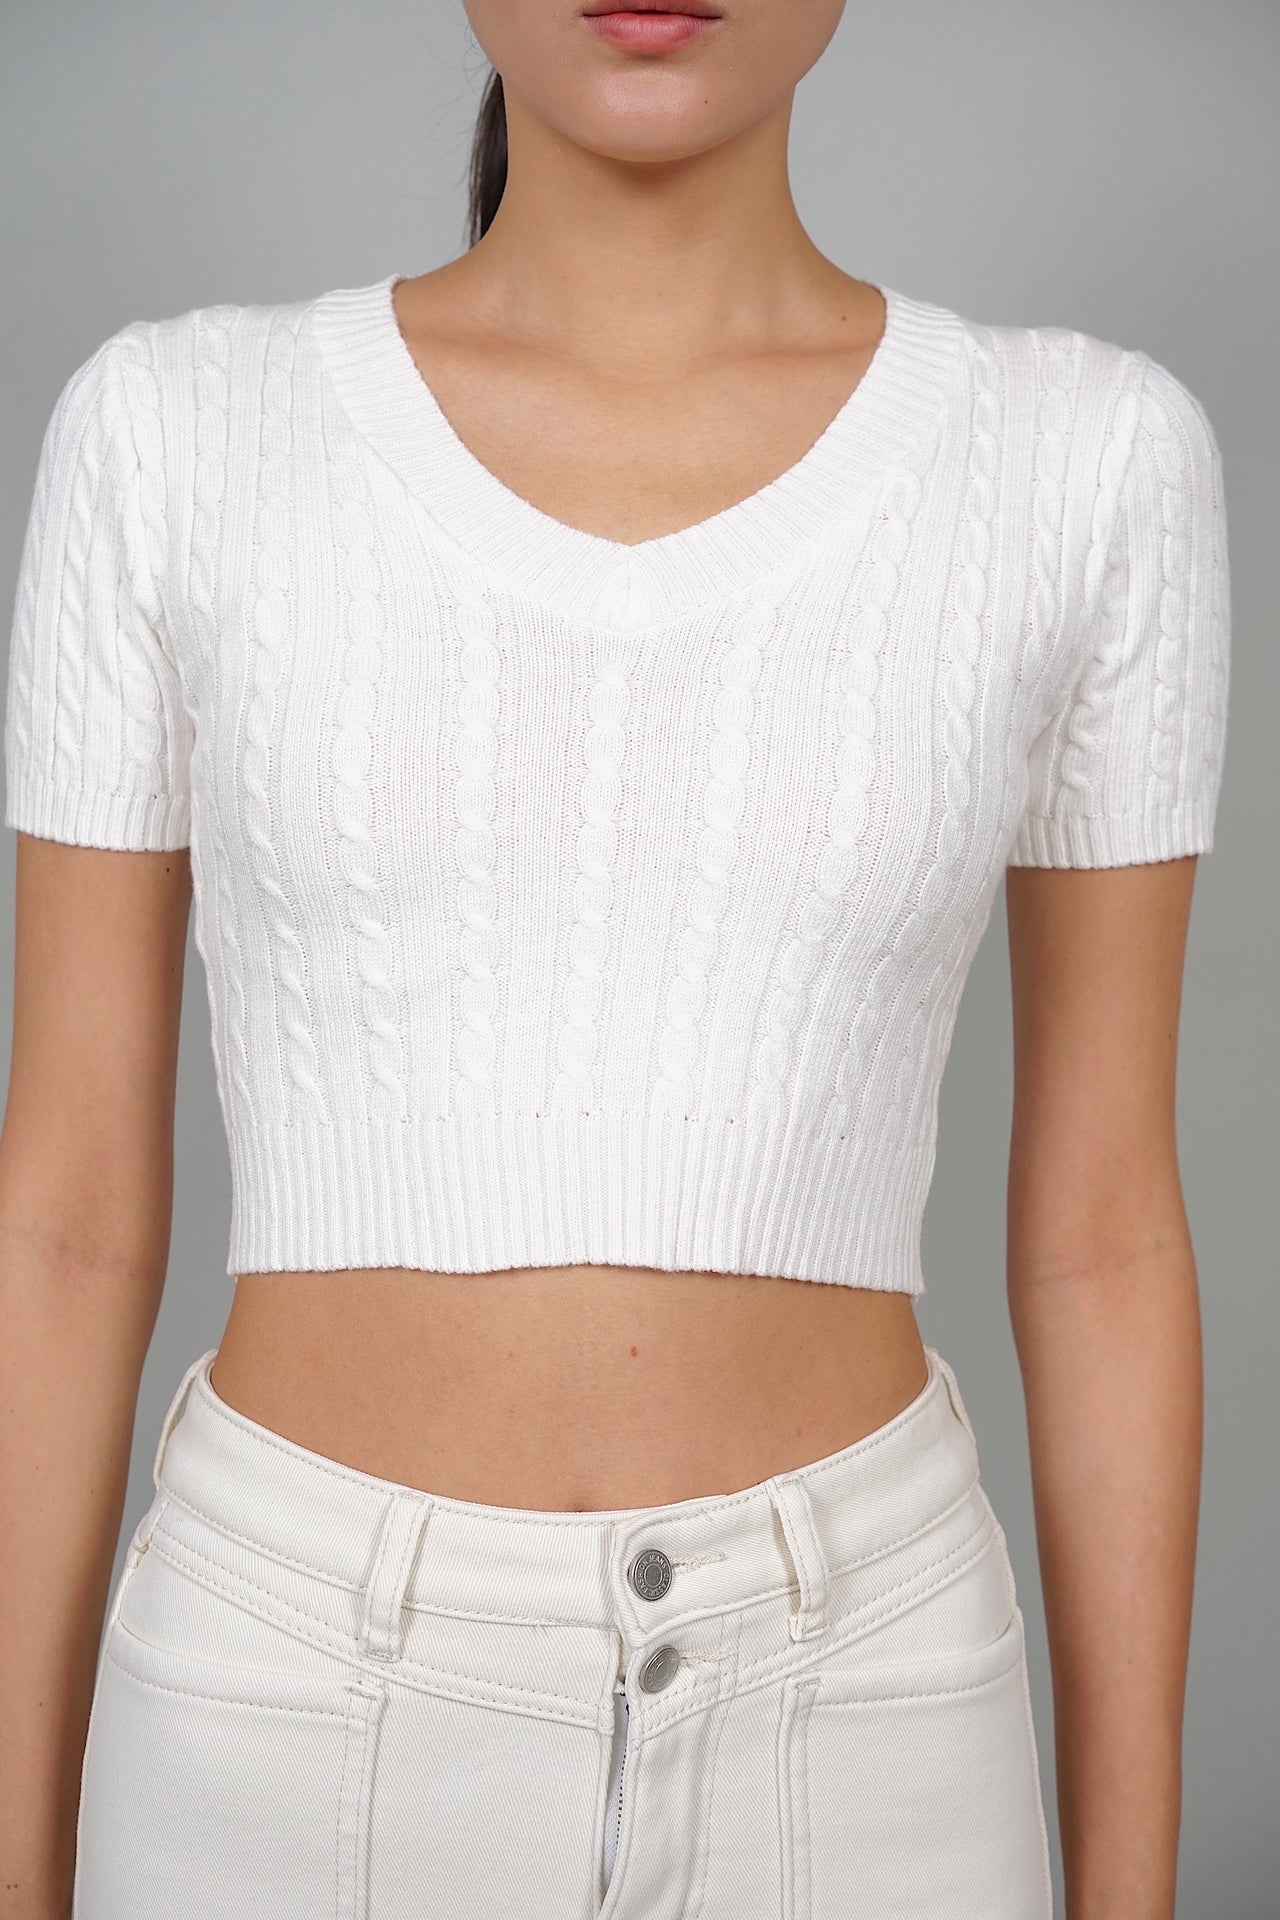 EVERYDAY / Jade Top in White